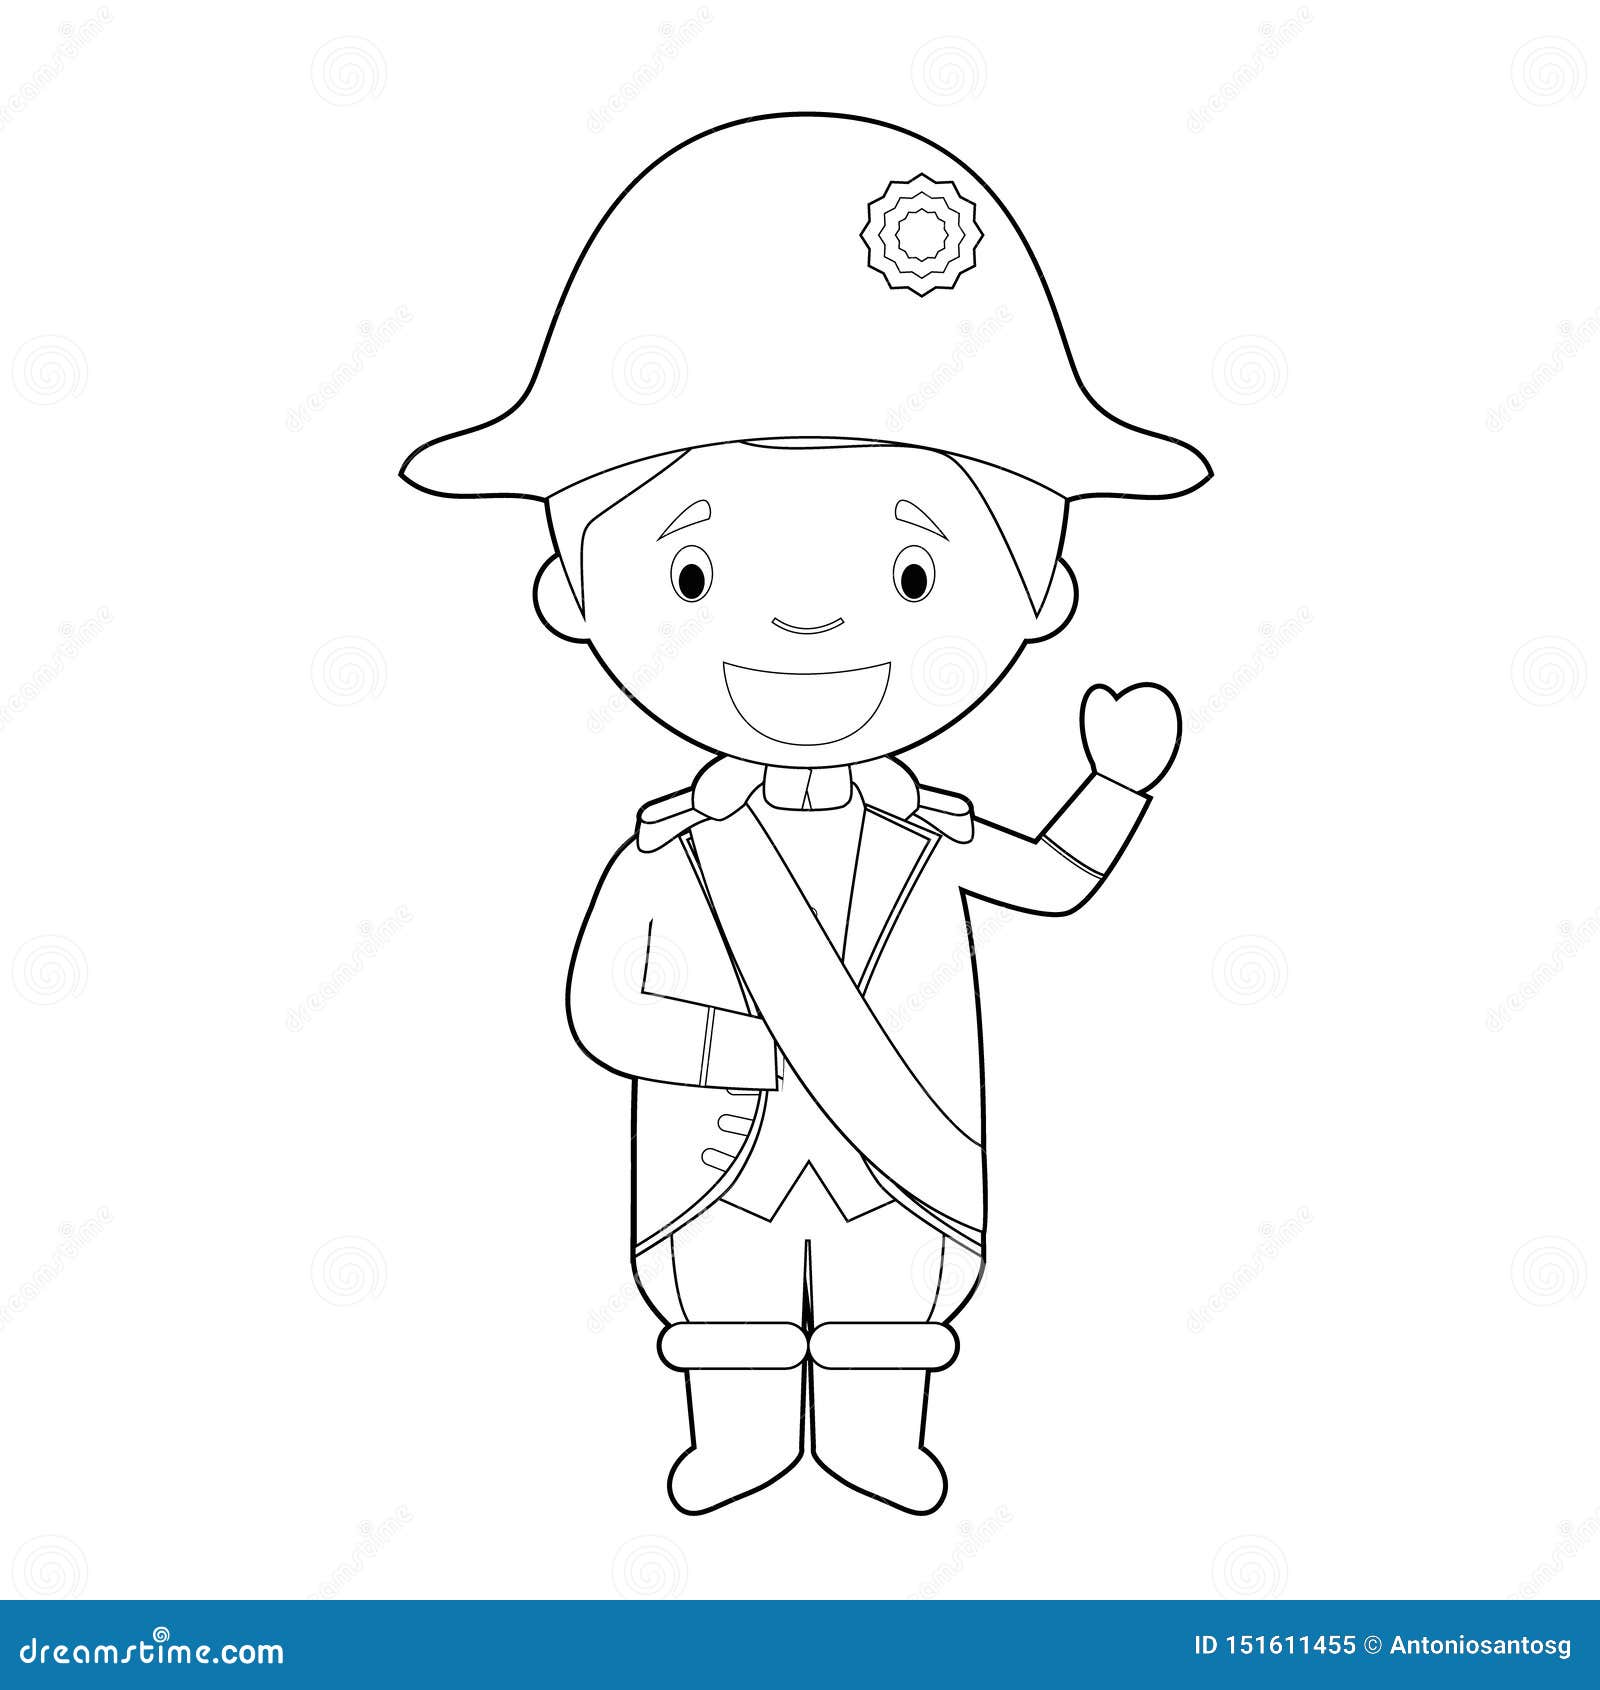 Easy coloring napoleon bonaparte cartoon character dressed in the traditional way vector illustration stock vector